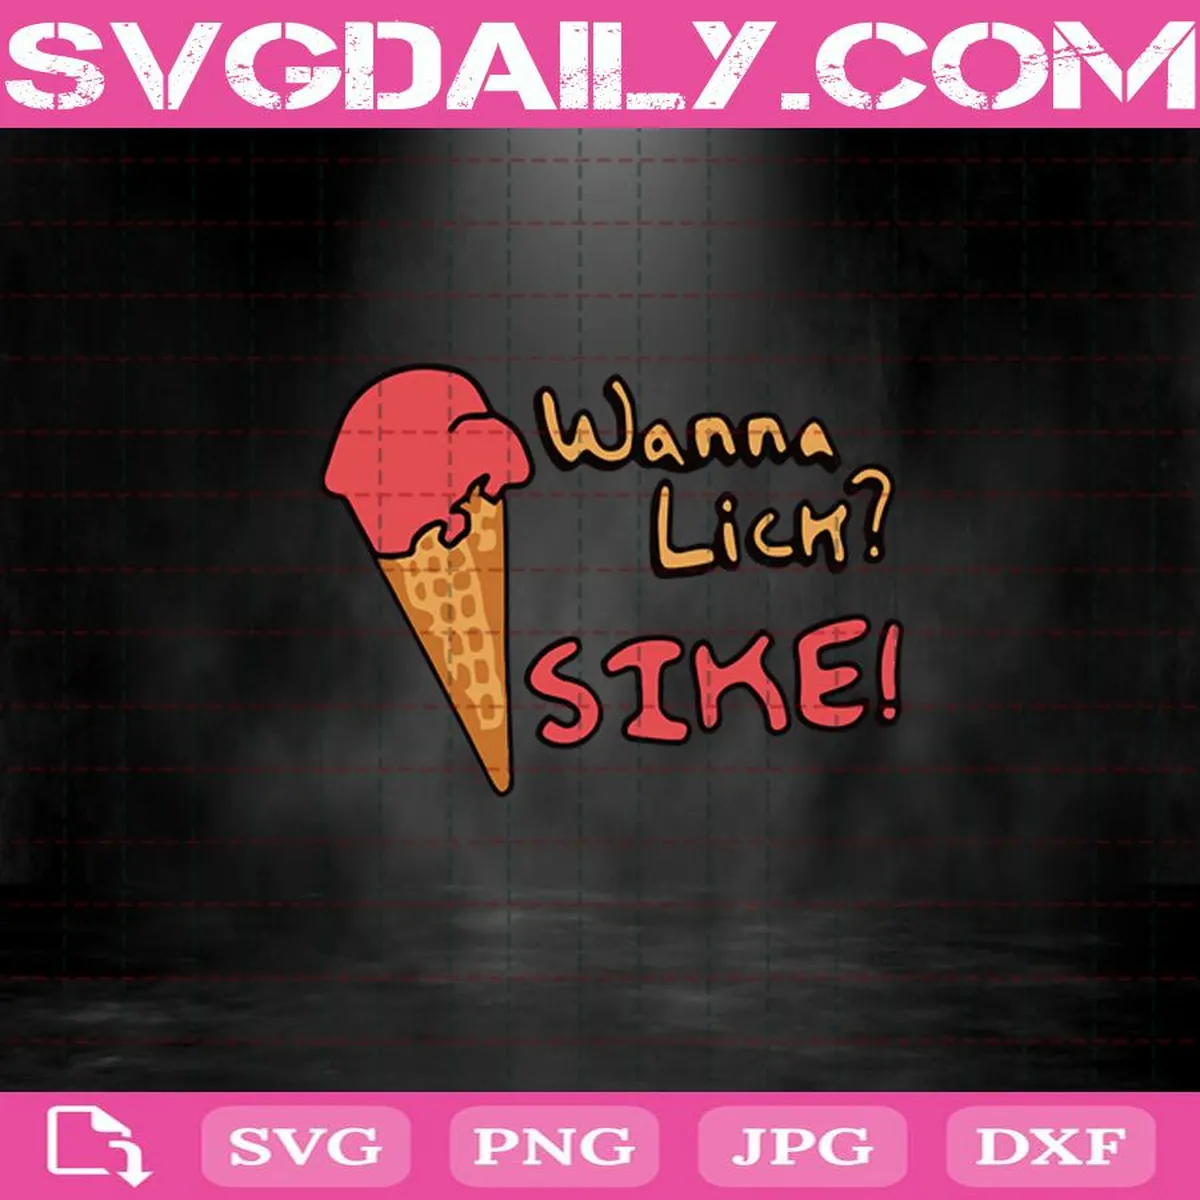 Ice Cream Wanna Lick Sike Svg, Wanna Lick Sike! Svg, Ice Cream Man Svg Png Dxf Eps Cut File Instant Download